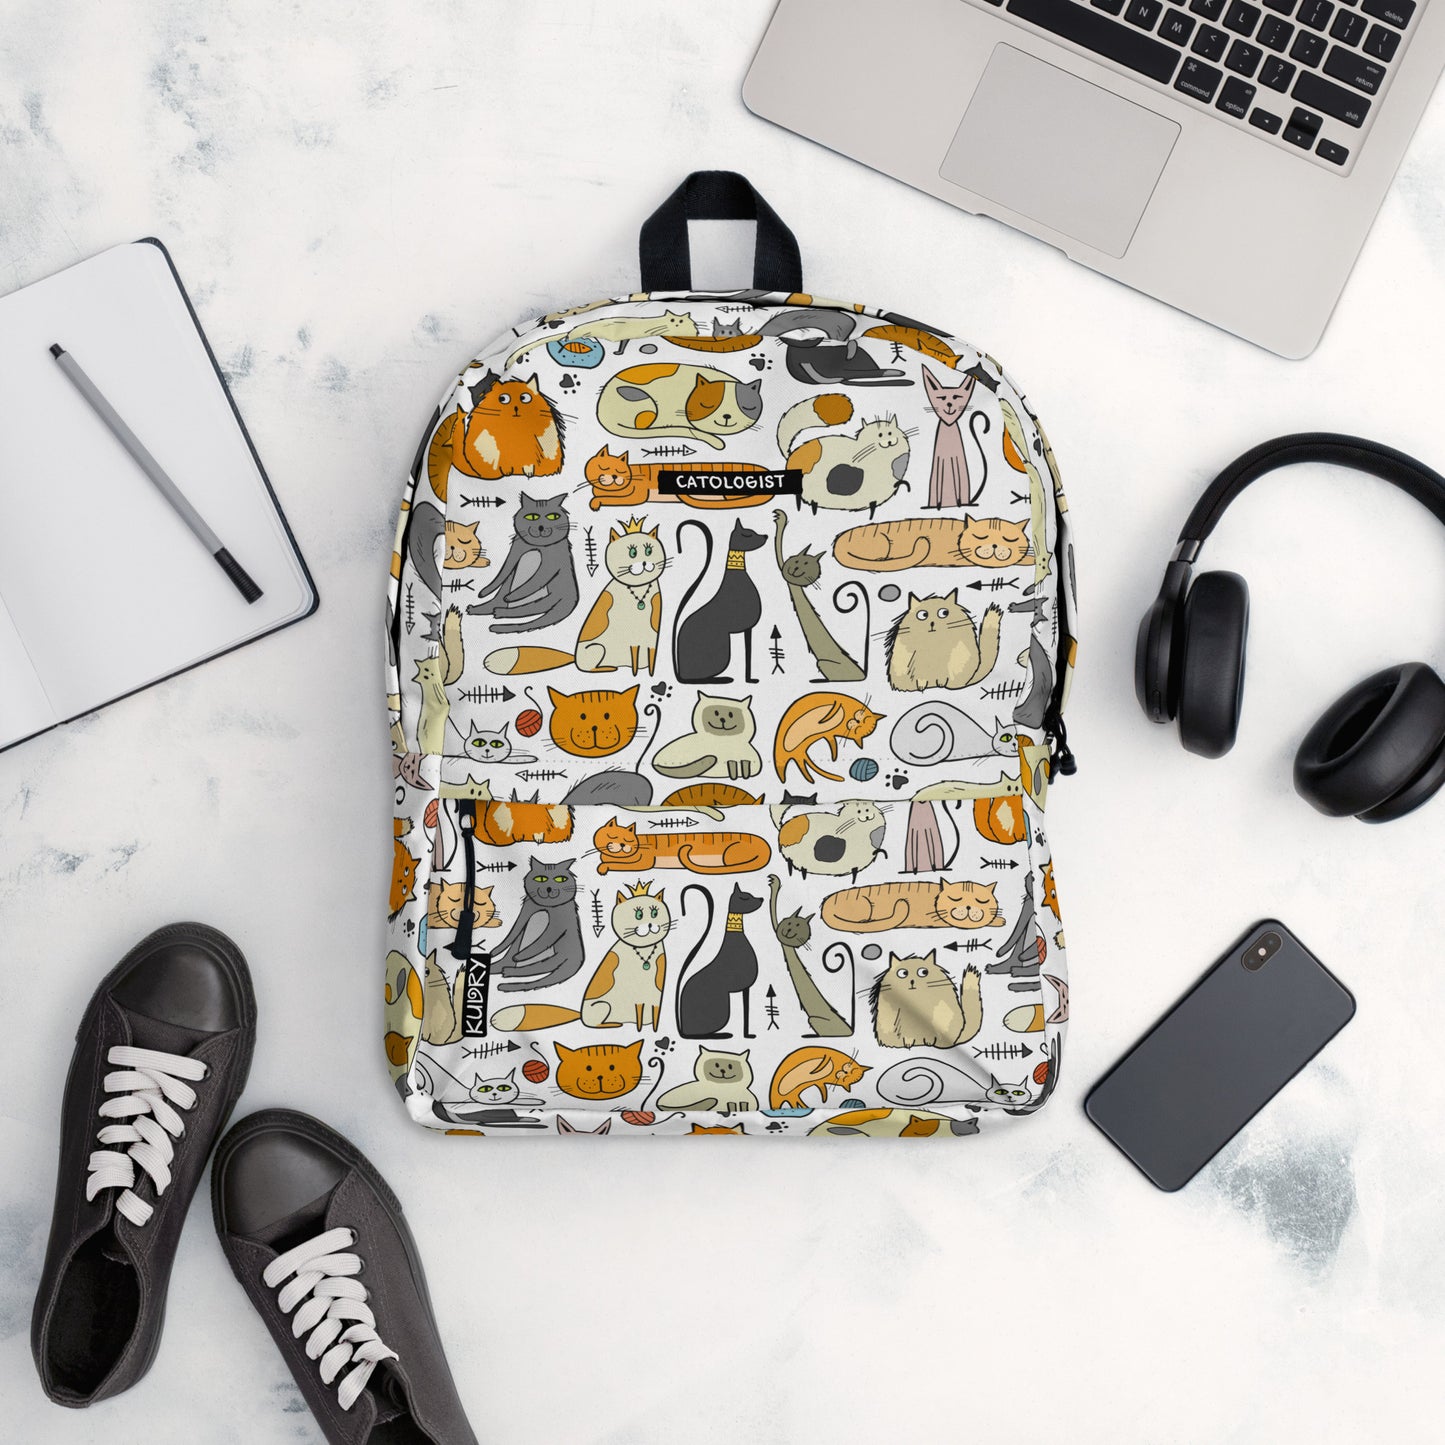 Personalised white Backpack with funny designer print - Cats of different breeds. Sample text on backpack -Catologist